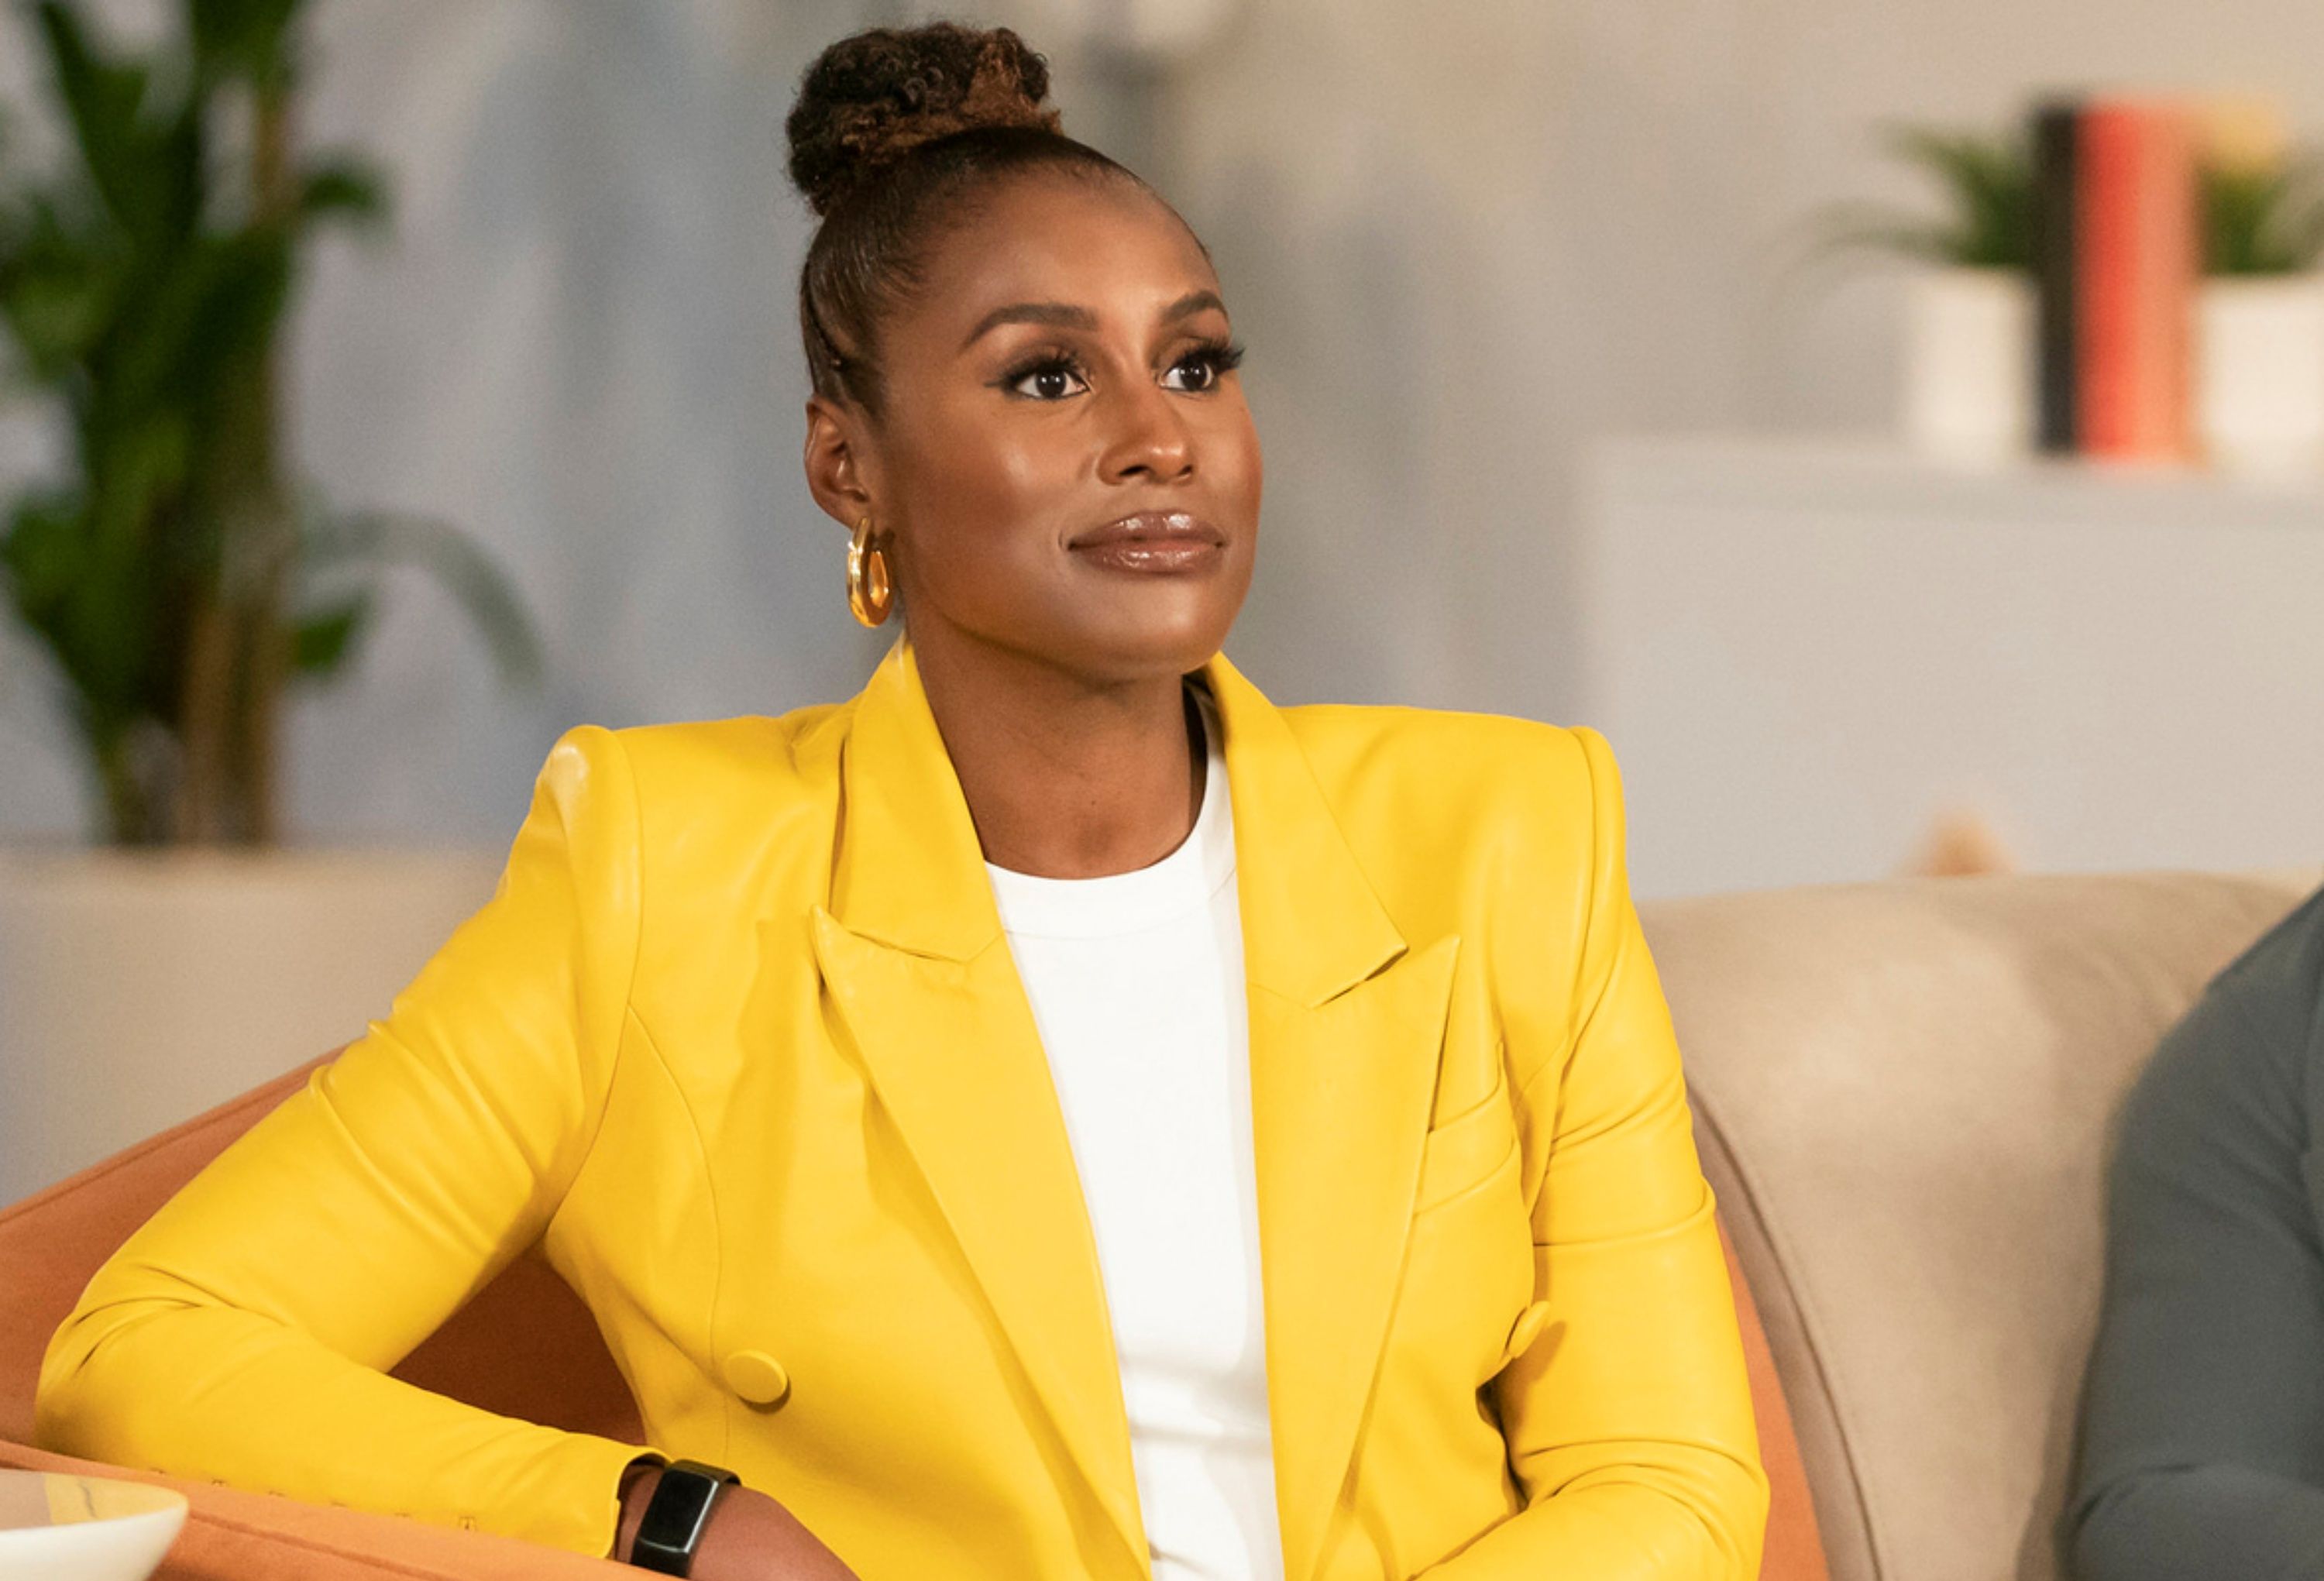 Issa Rae for Project Greenlight